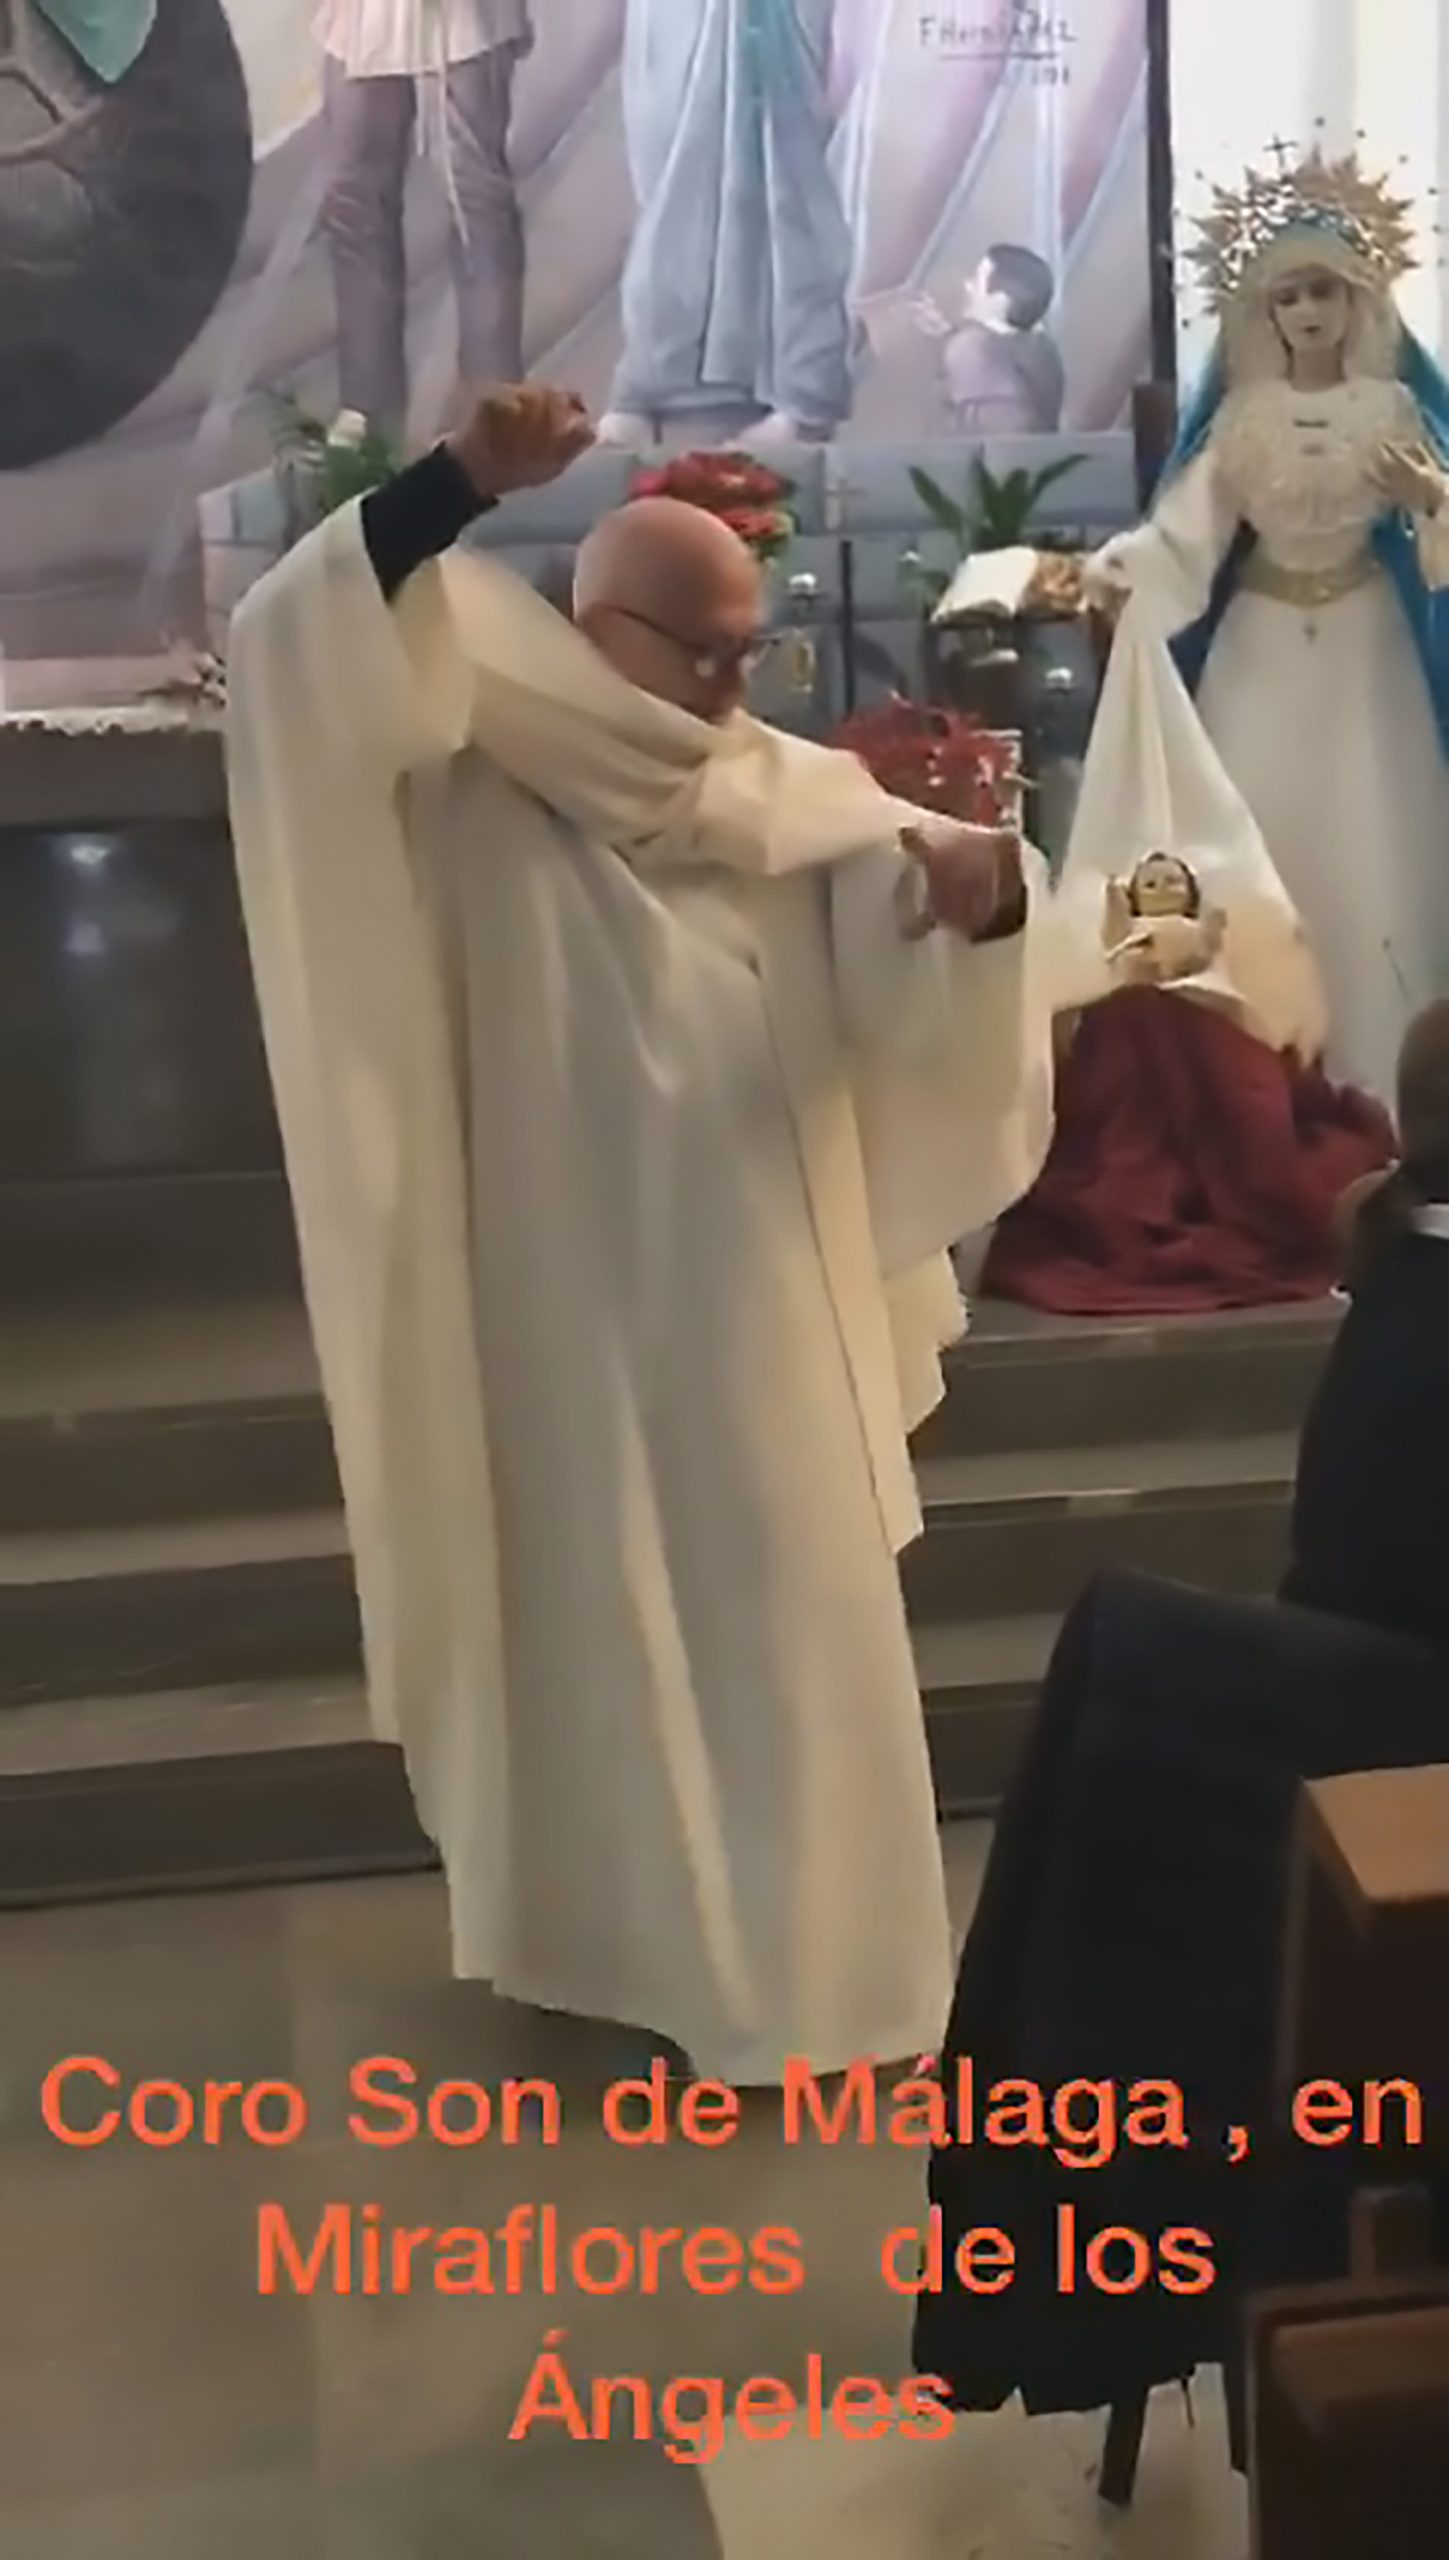 Read more about the article Footloose Priest Shows Off Flamenco Moves During Mass